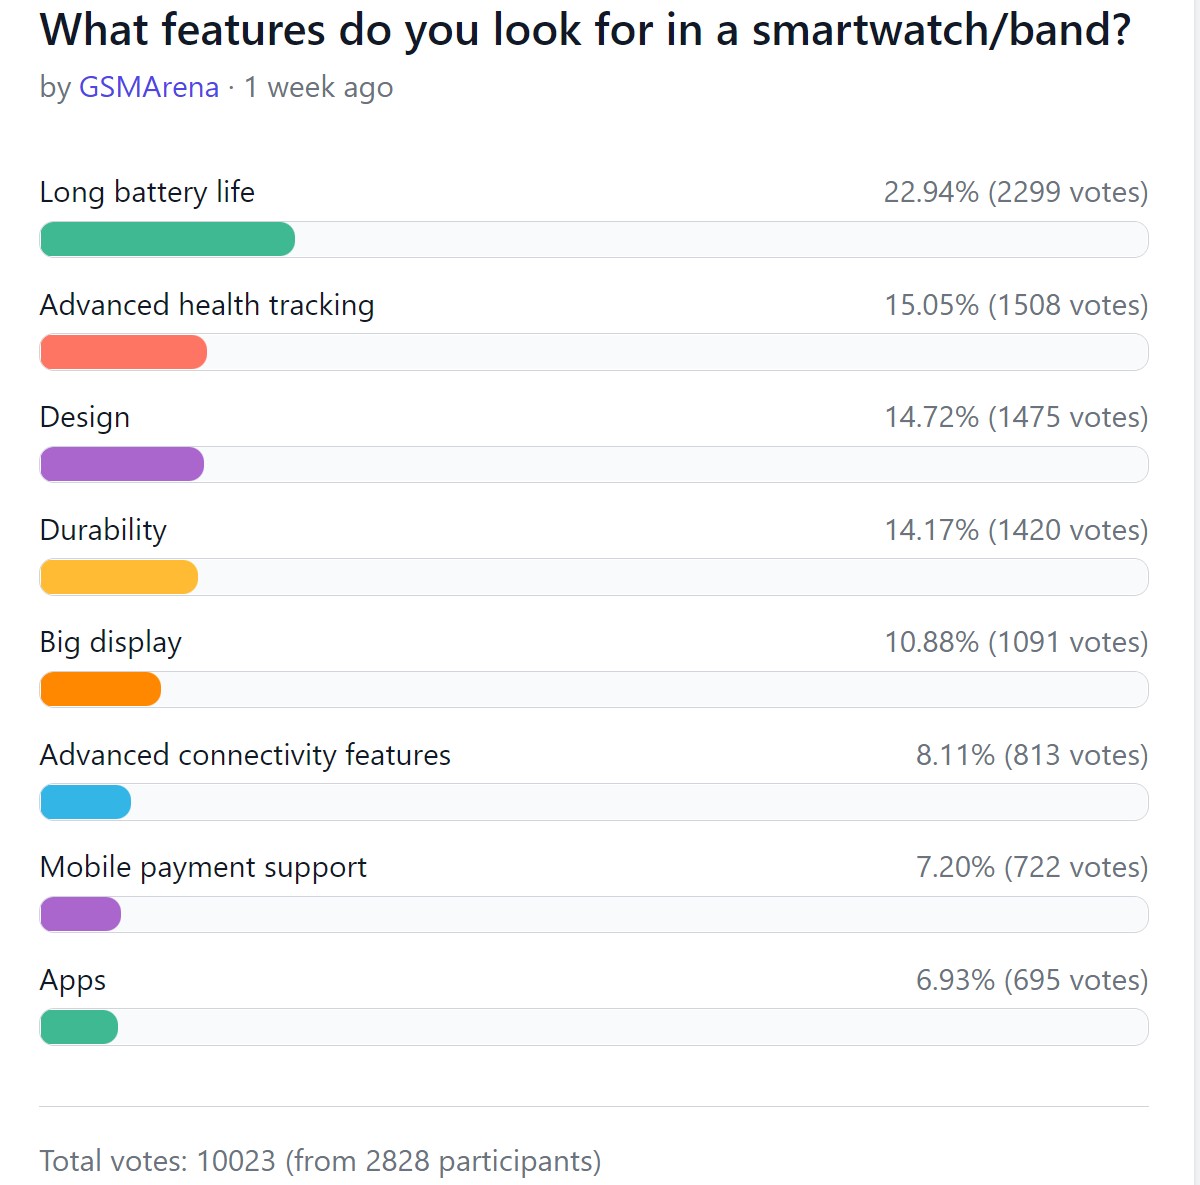 Weekly poll results: smartwatches are becoming more popular, especially the advanced ones